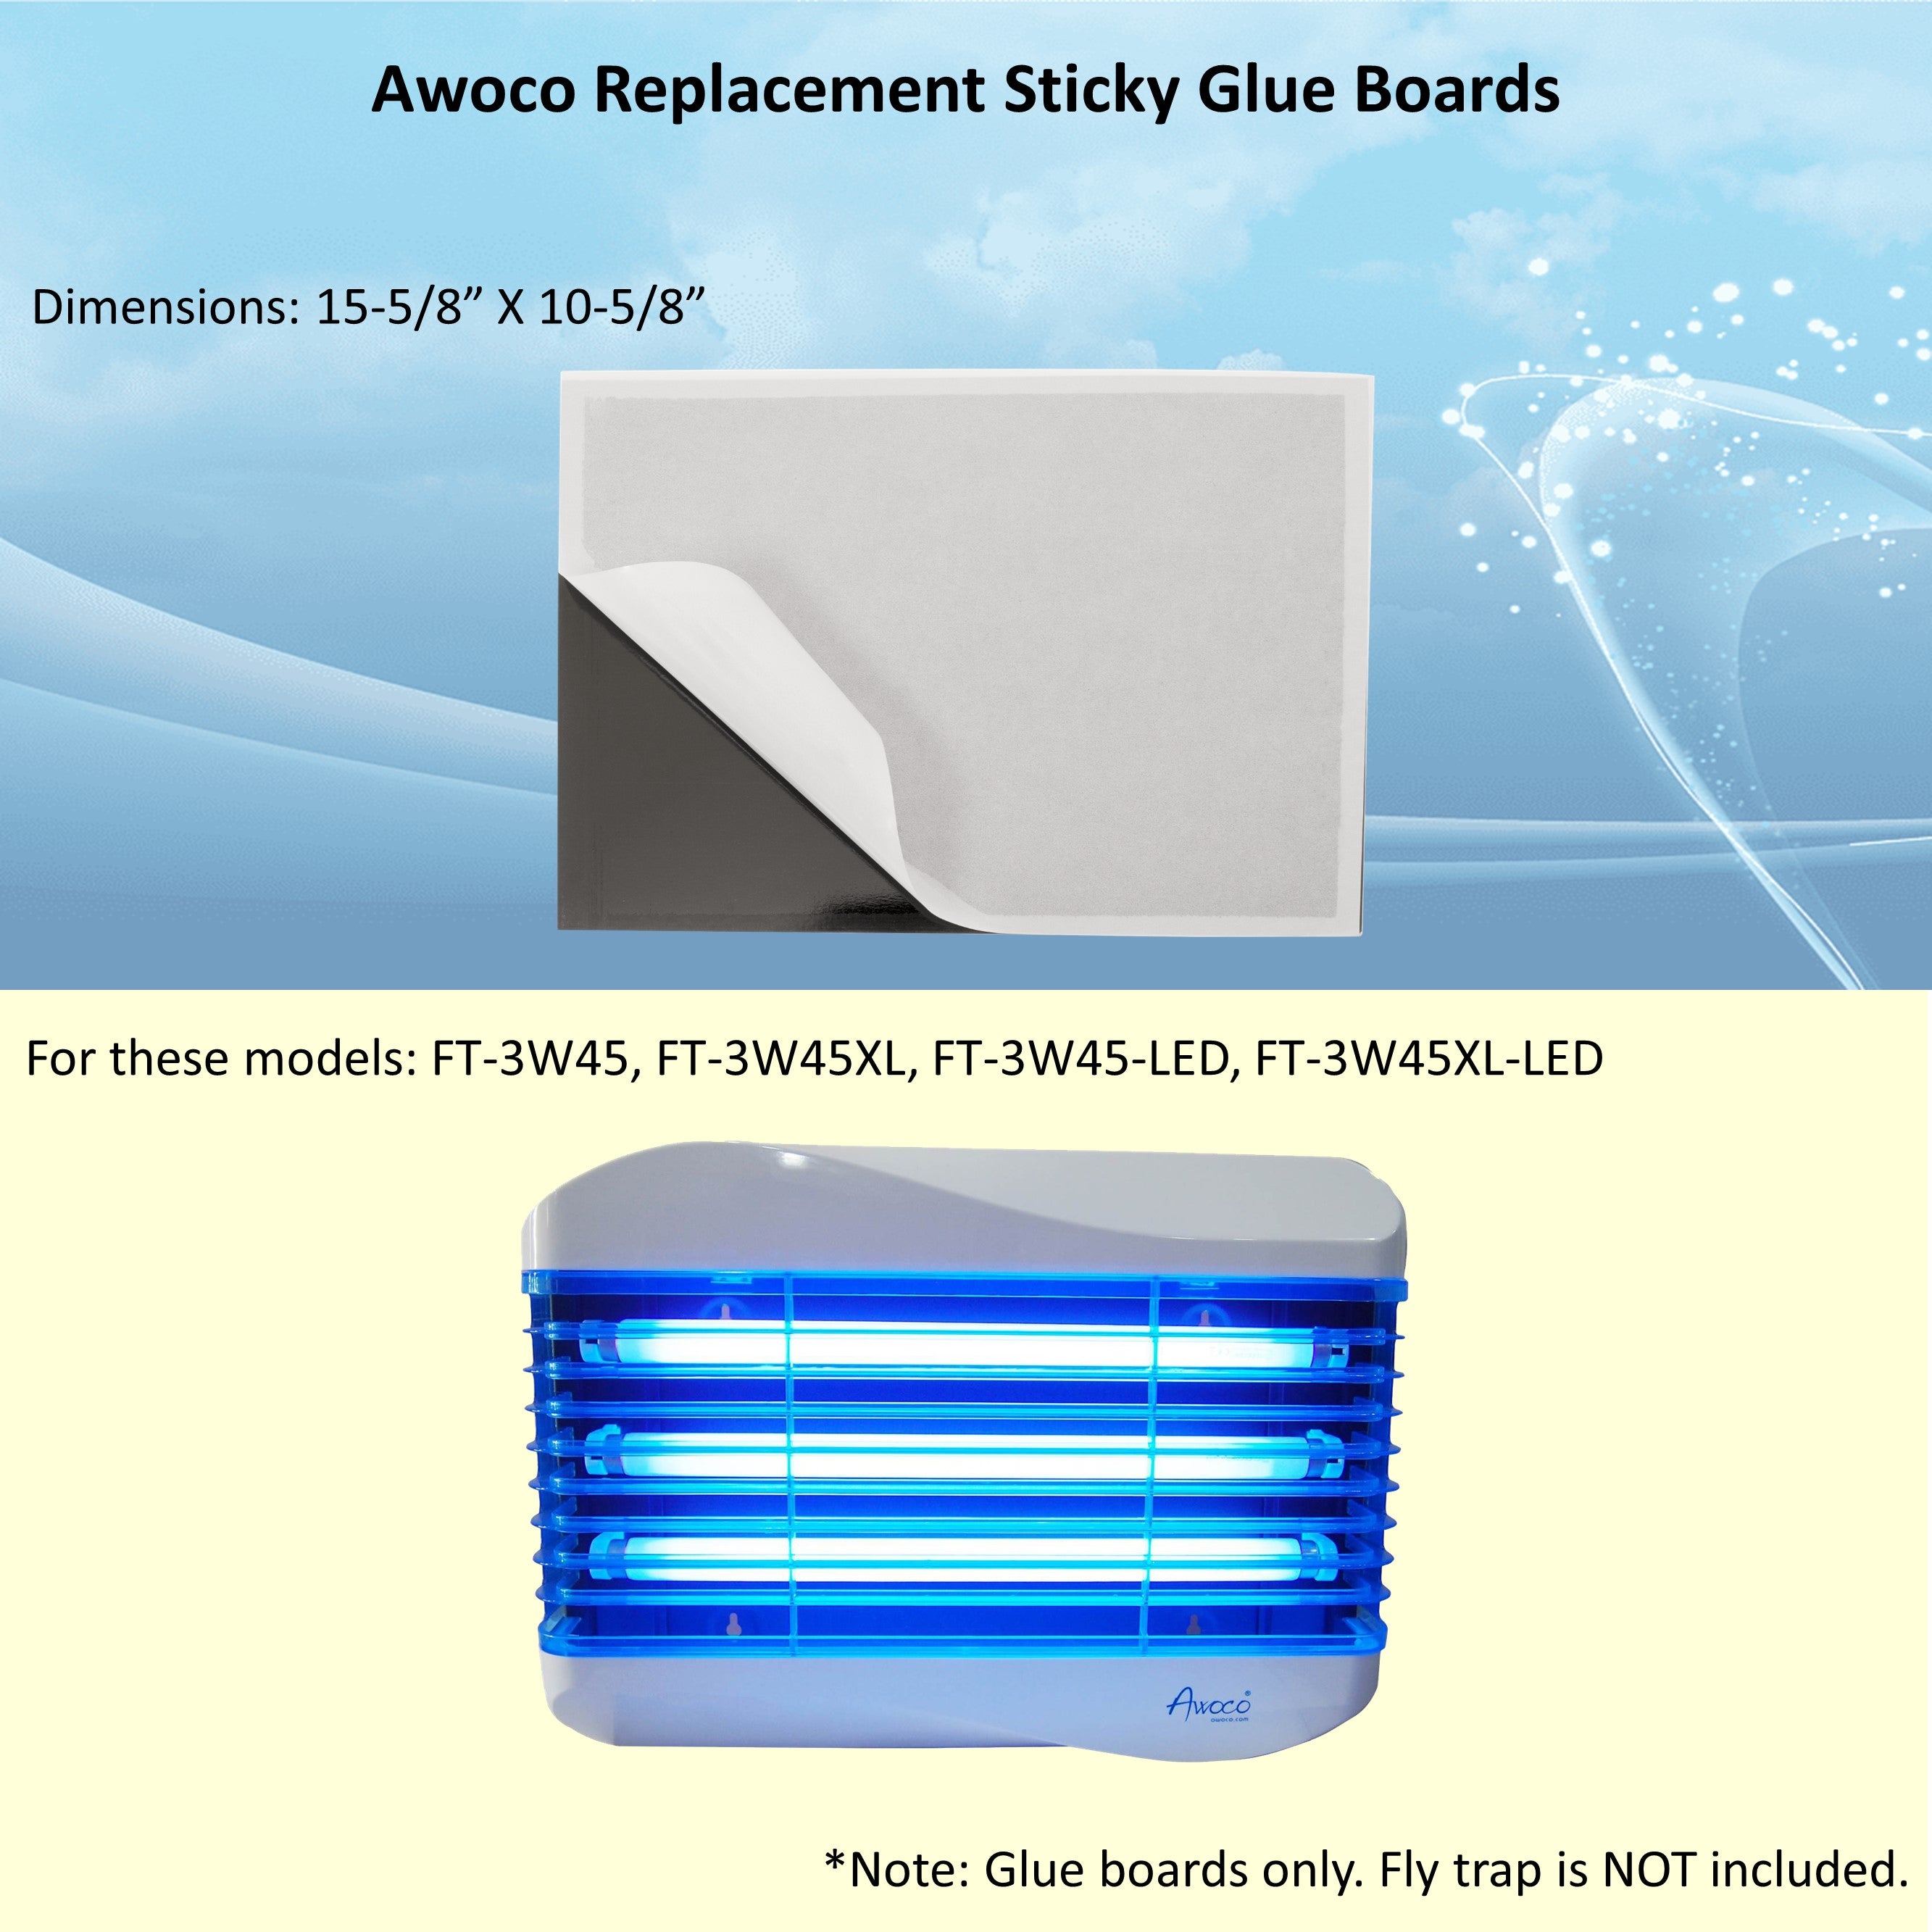 Awoco Pack of 5 Replacement Sticky Glue Boards for Wall Mount Sticky Fly Trap Lamp (5 Glue Boards for FT-3W45)